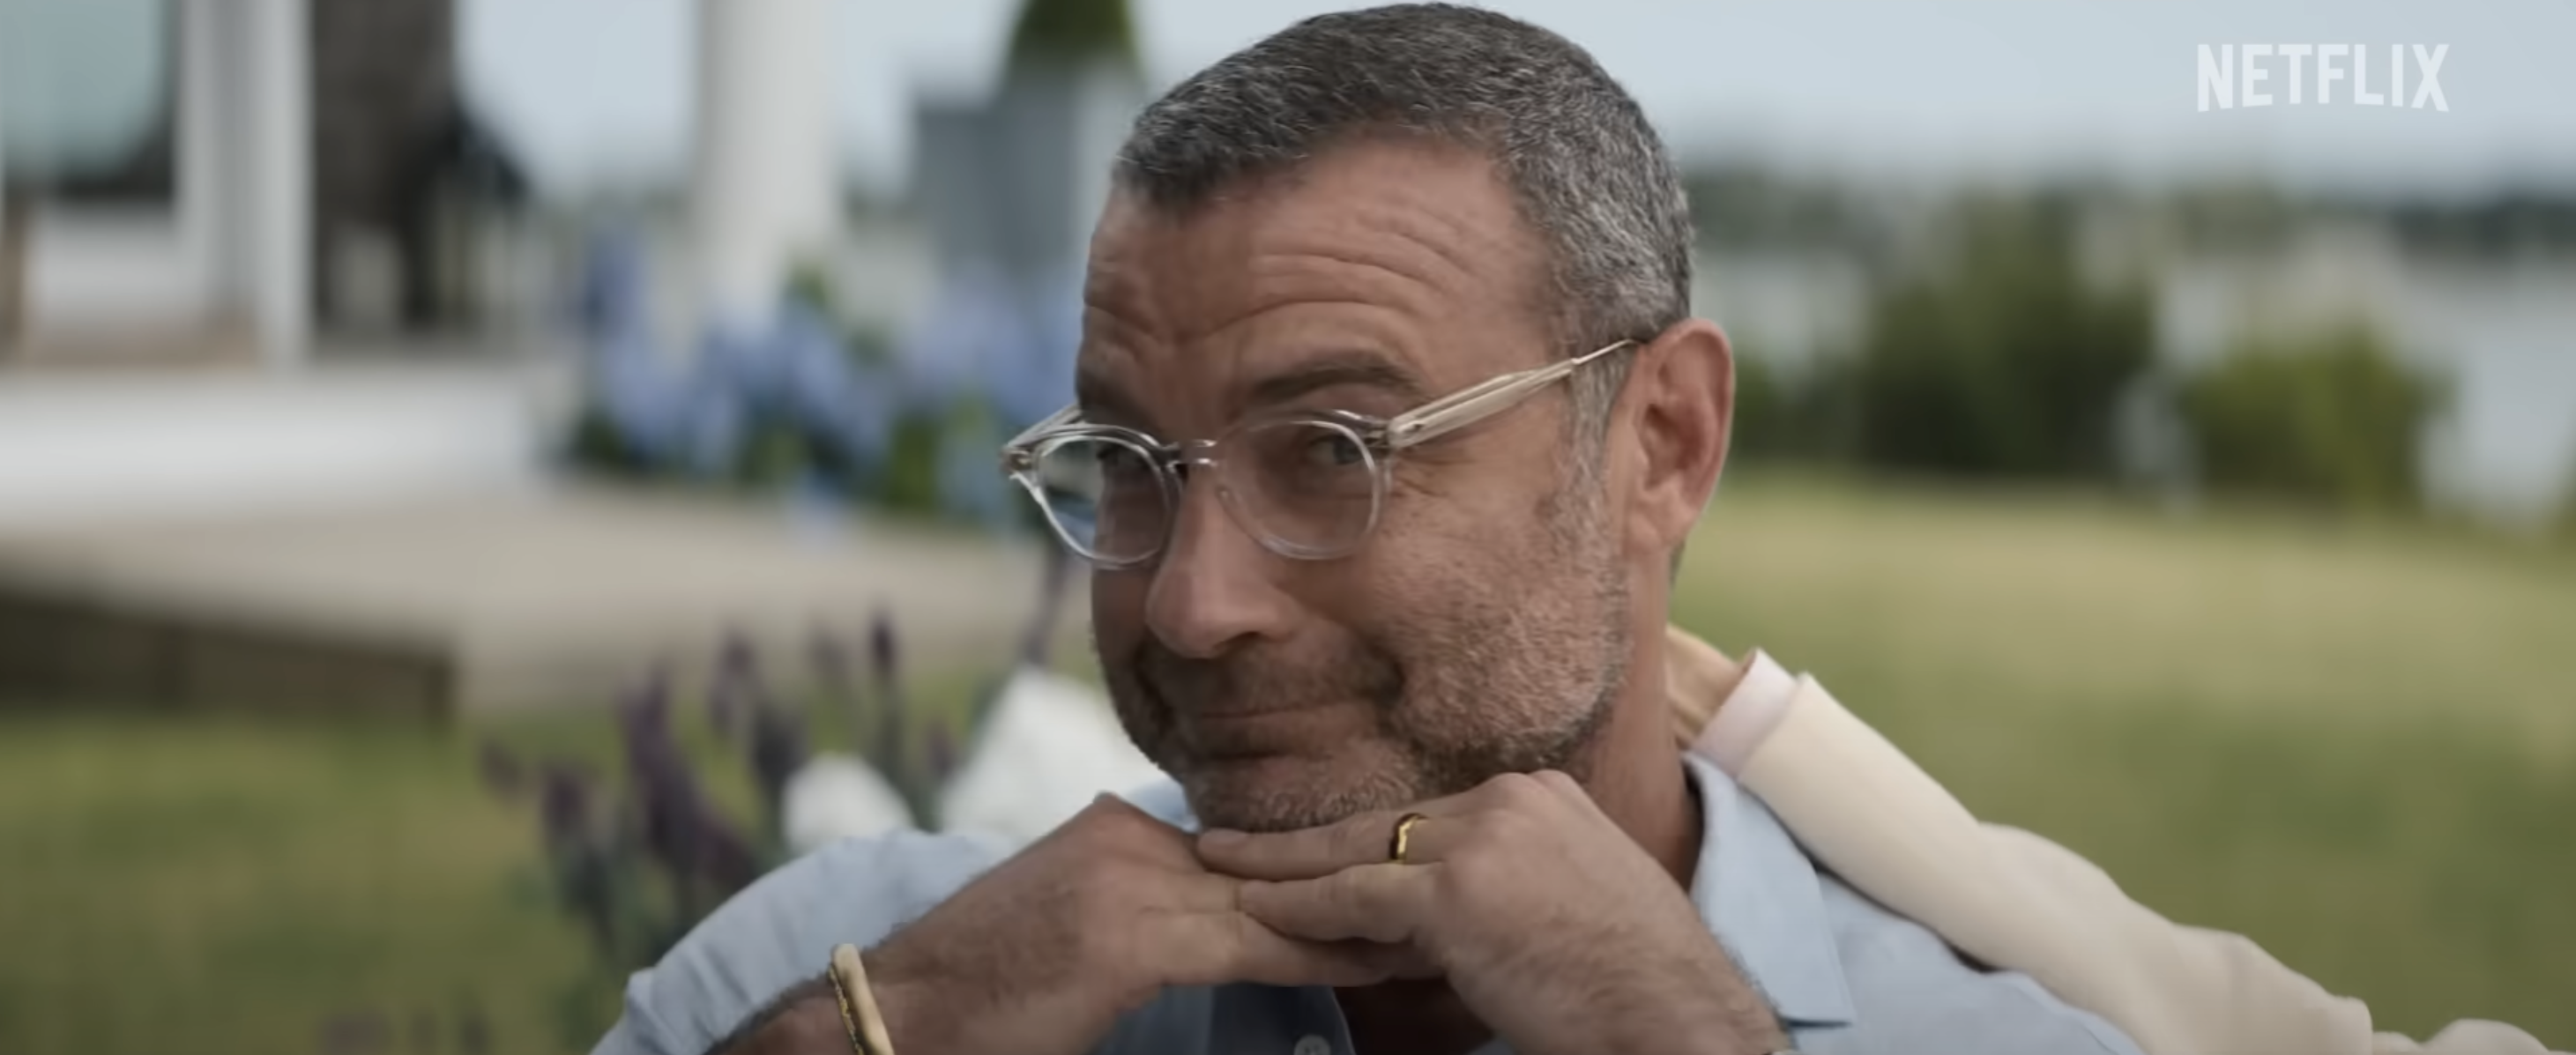 Liev Schreiber smiles mischievously with hands under his chin while wearing glasses and a light shirt